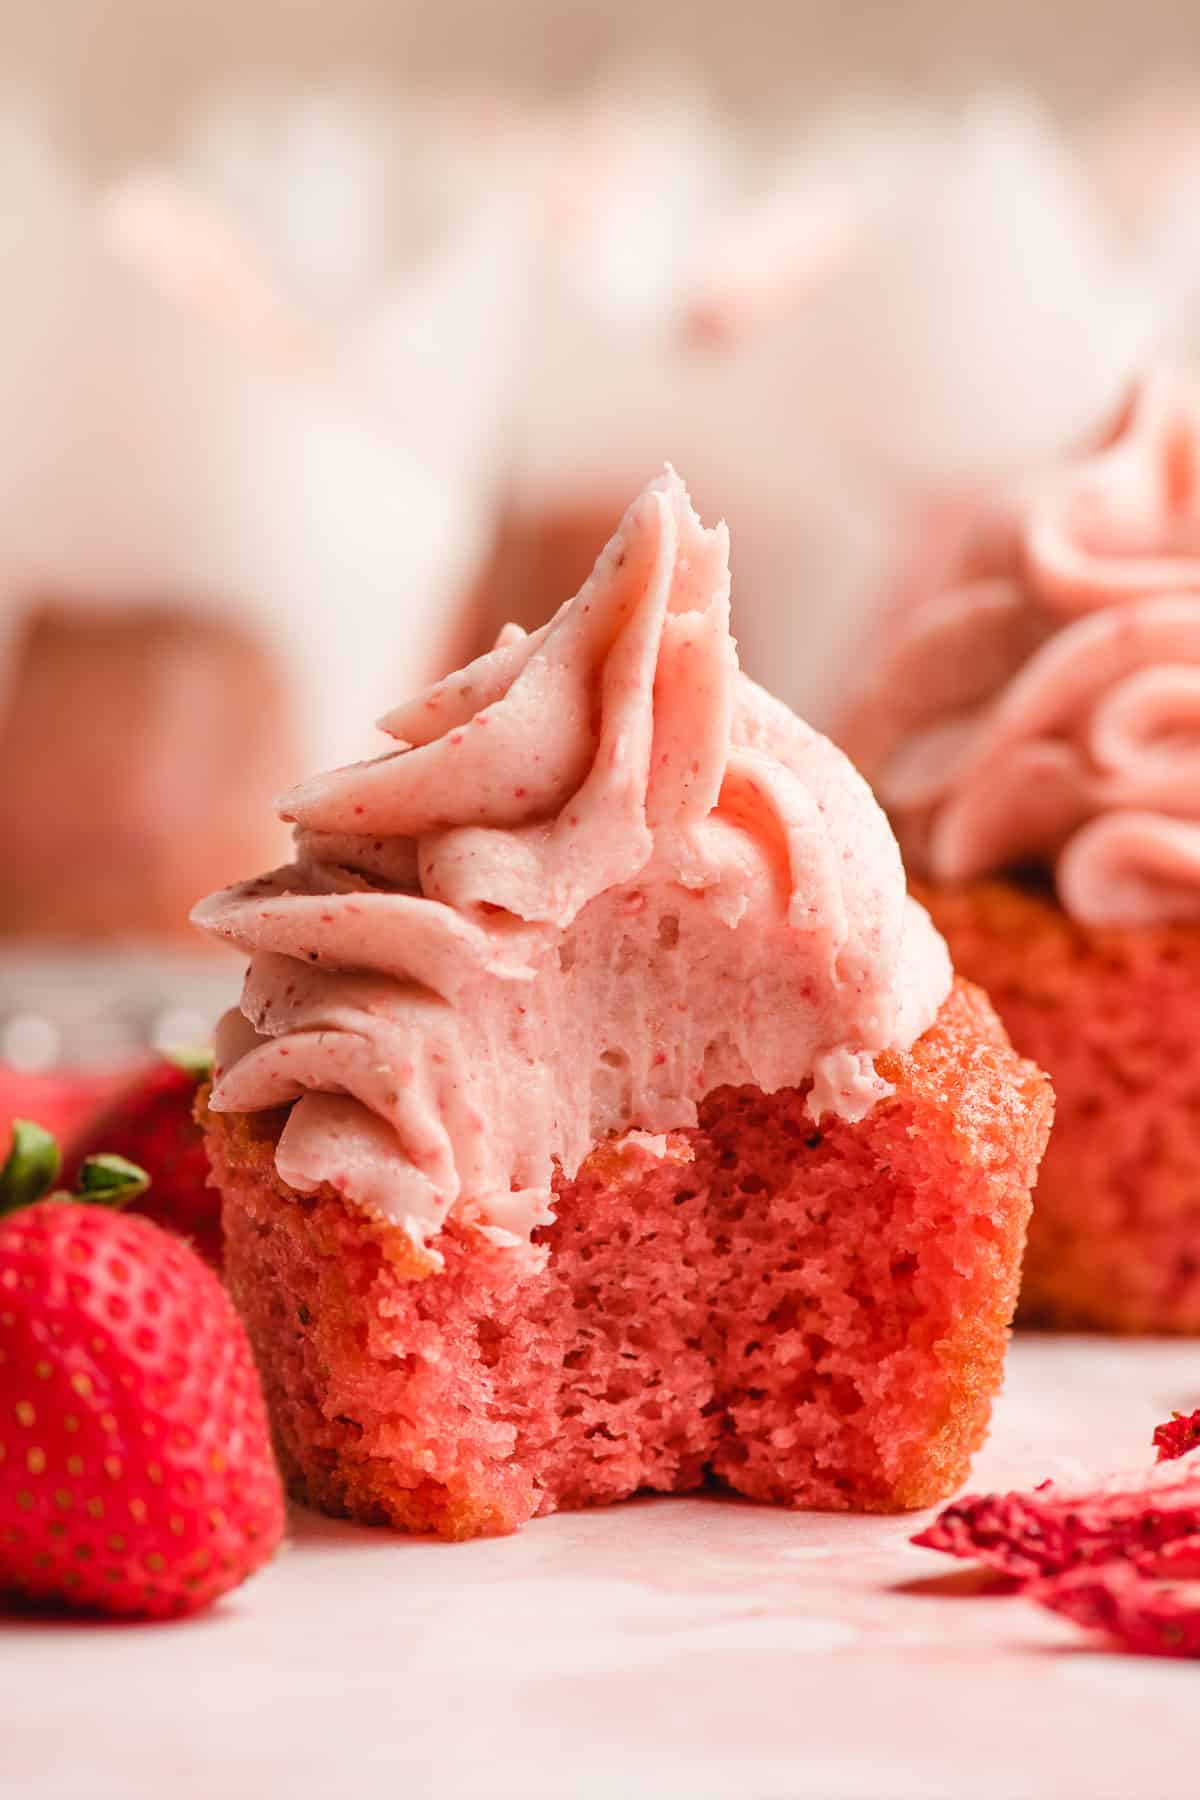 Strawberry cupcake with a big zest taken out of it.